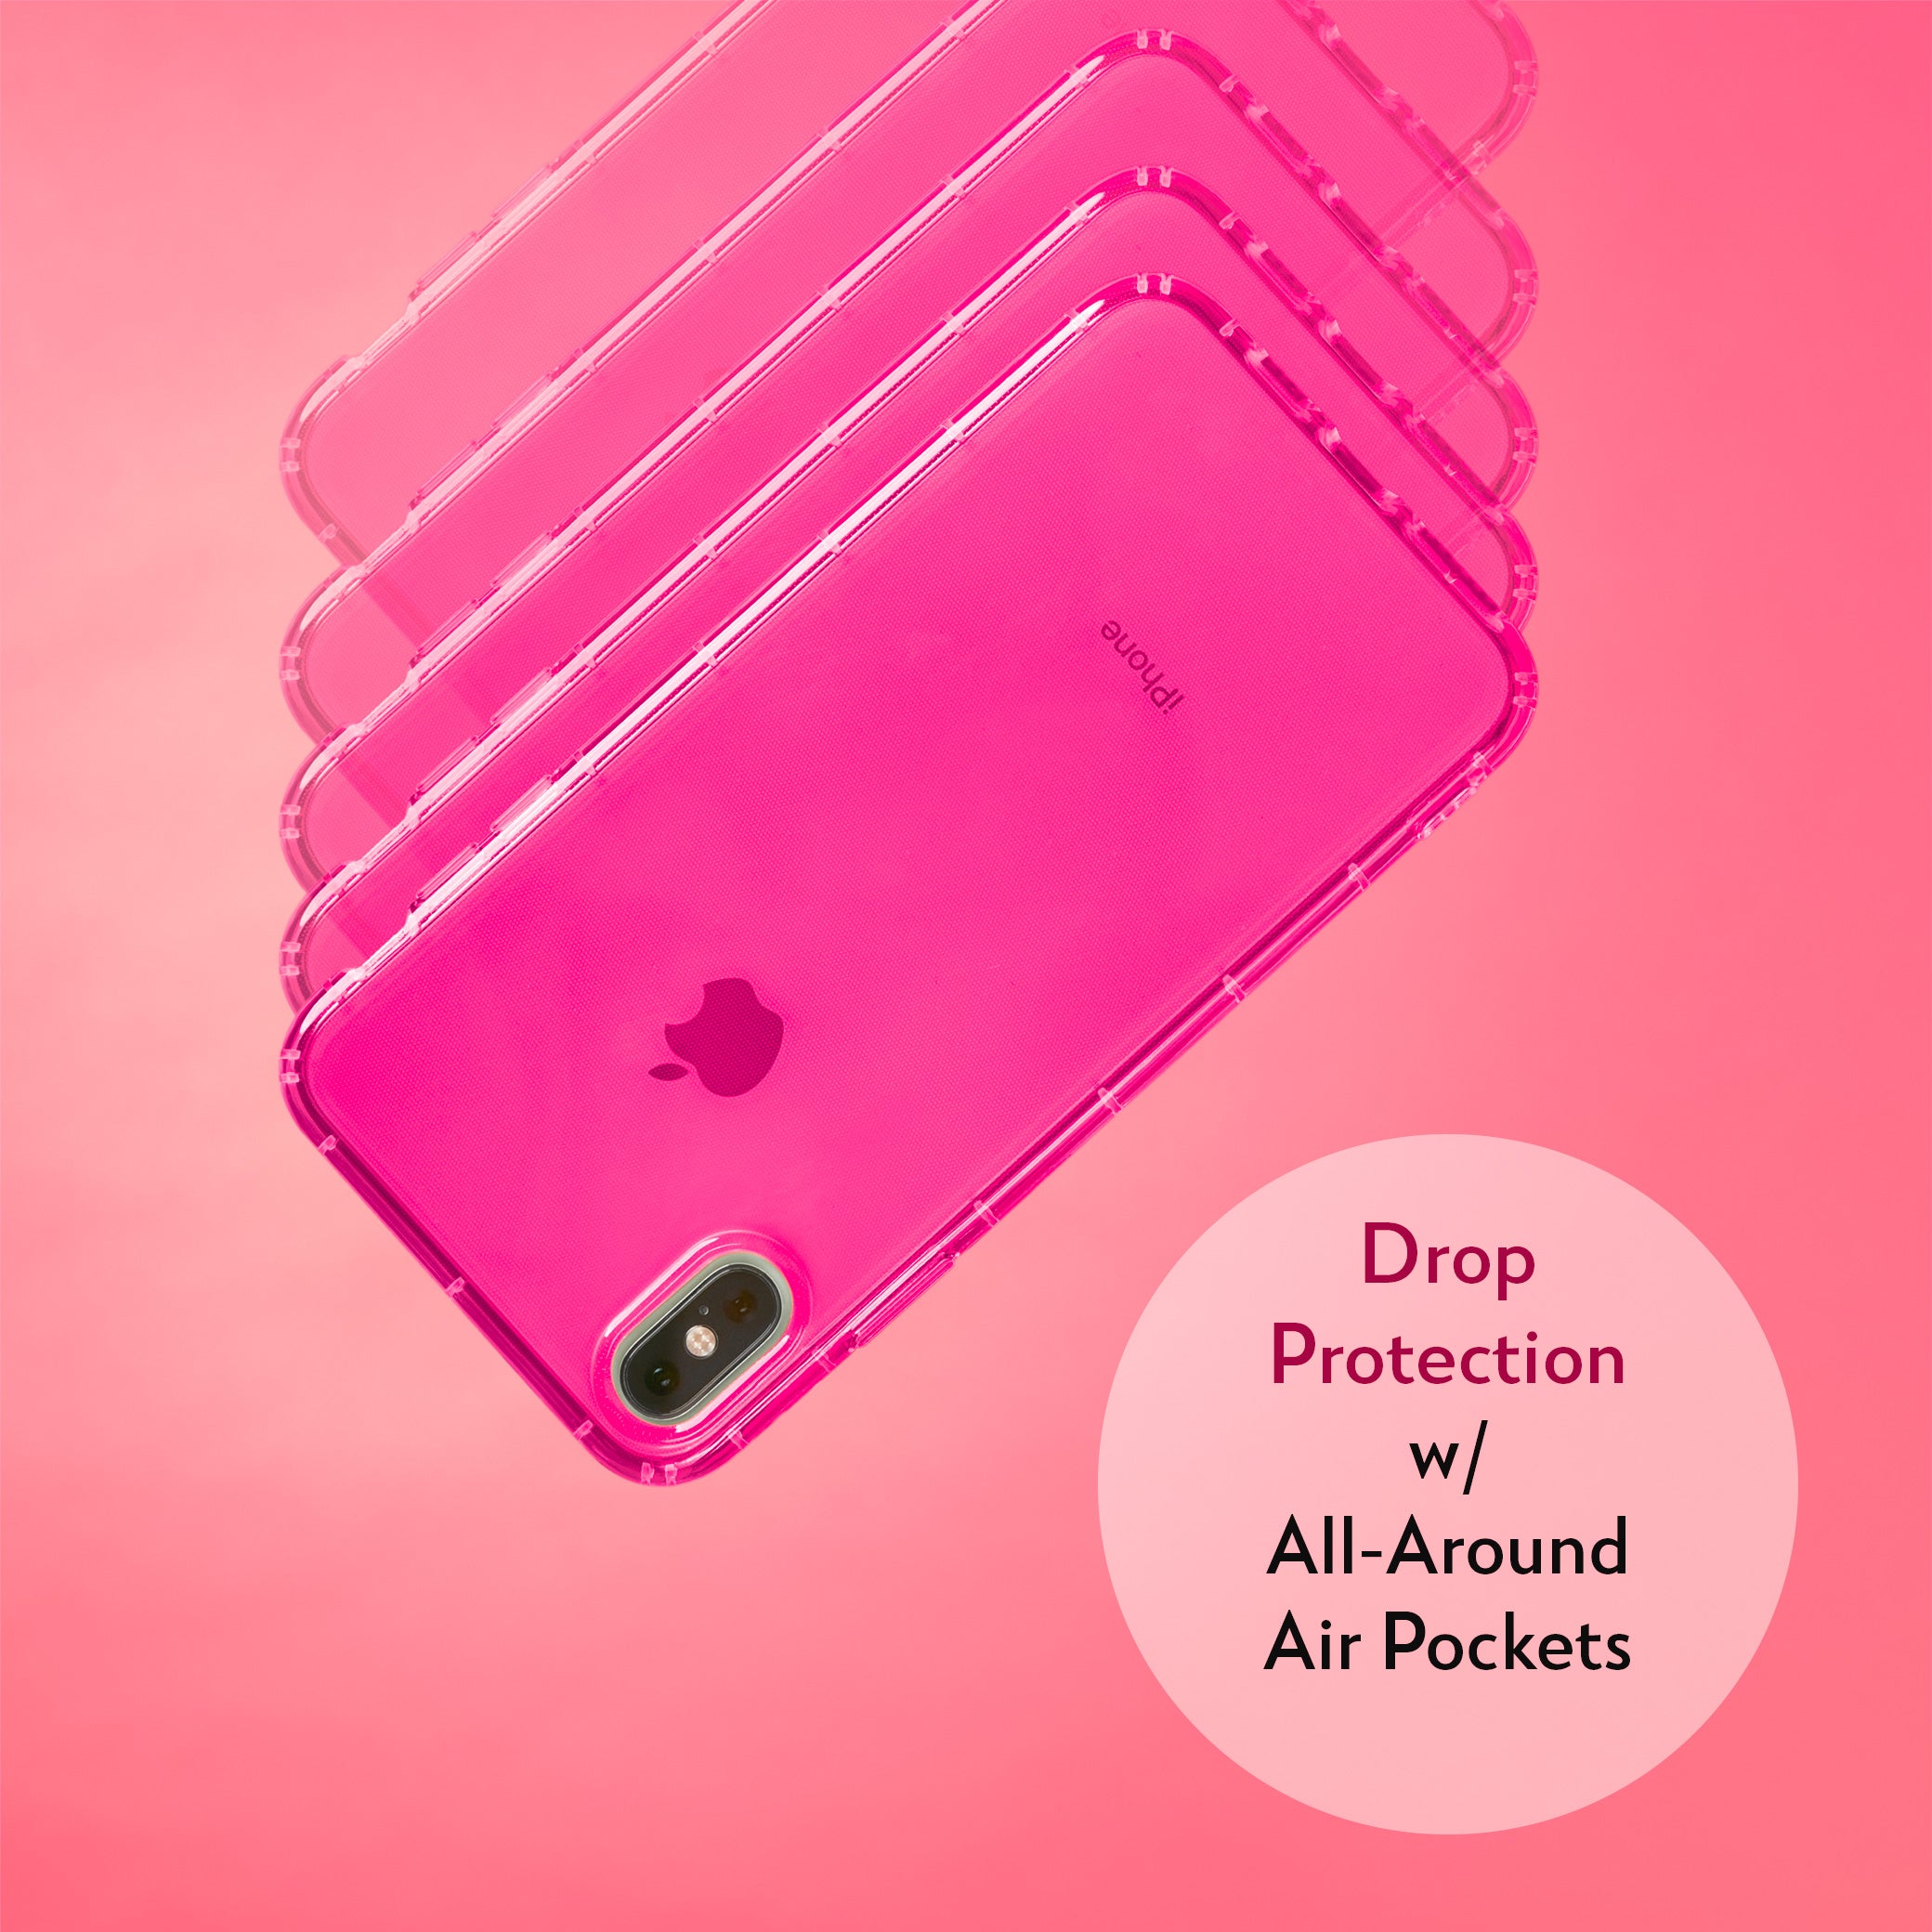 Highlighter Case for iPhone Xs Max - Eye-Catching Hot Pink